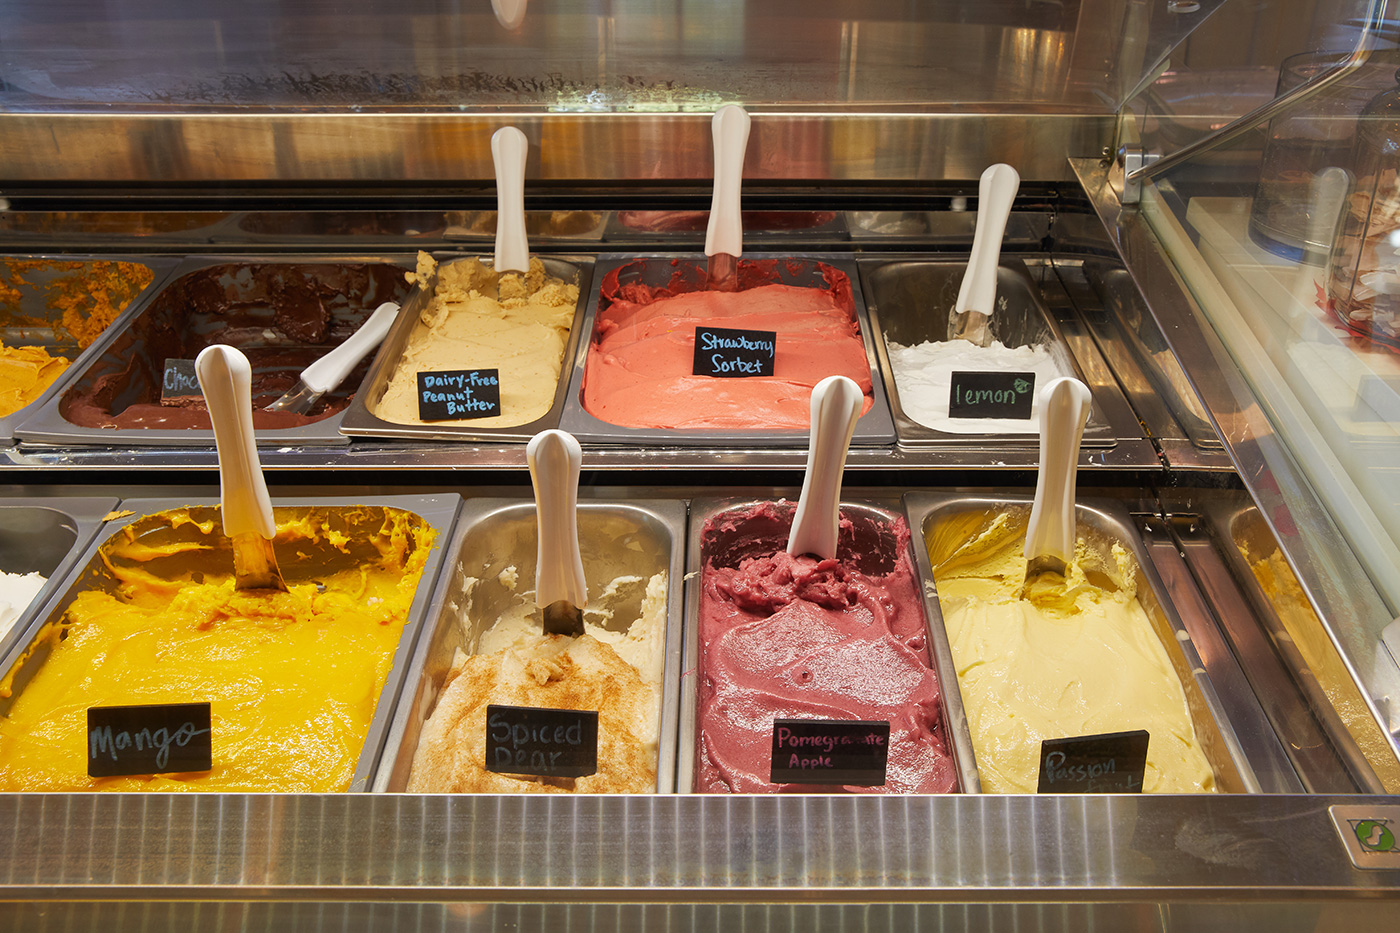 Close up of the scrumptious looking gelato flavors behind display case.